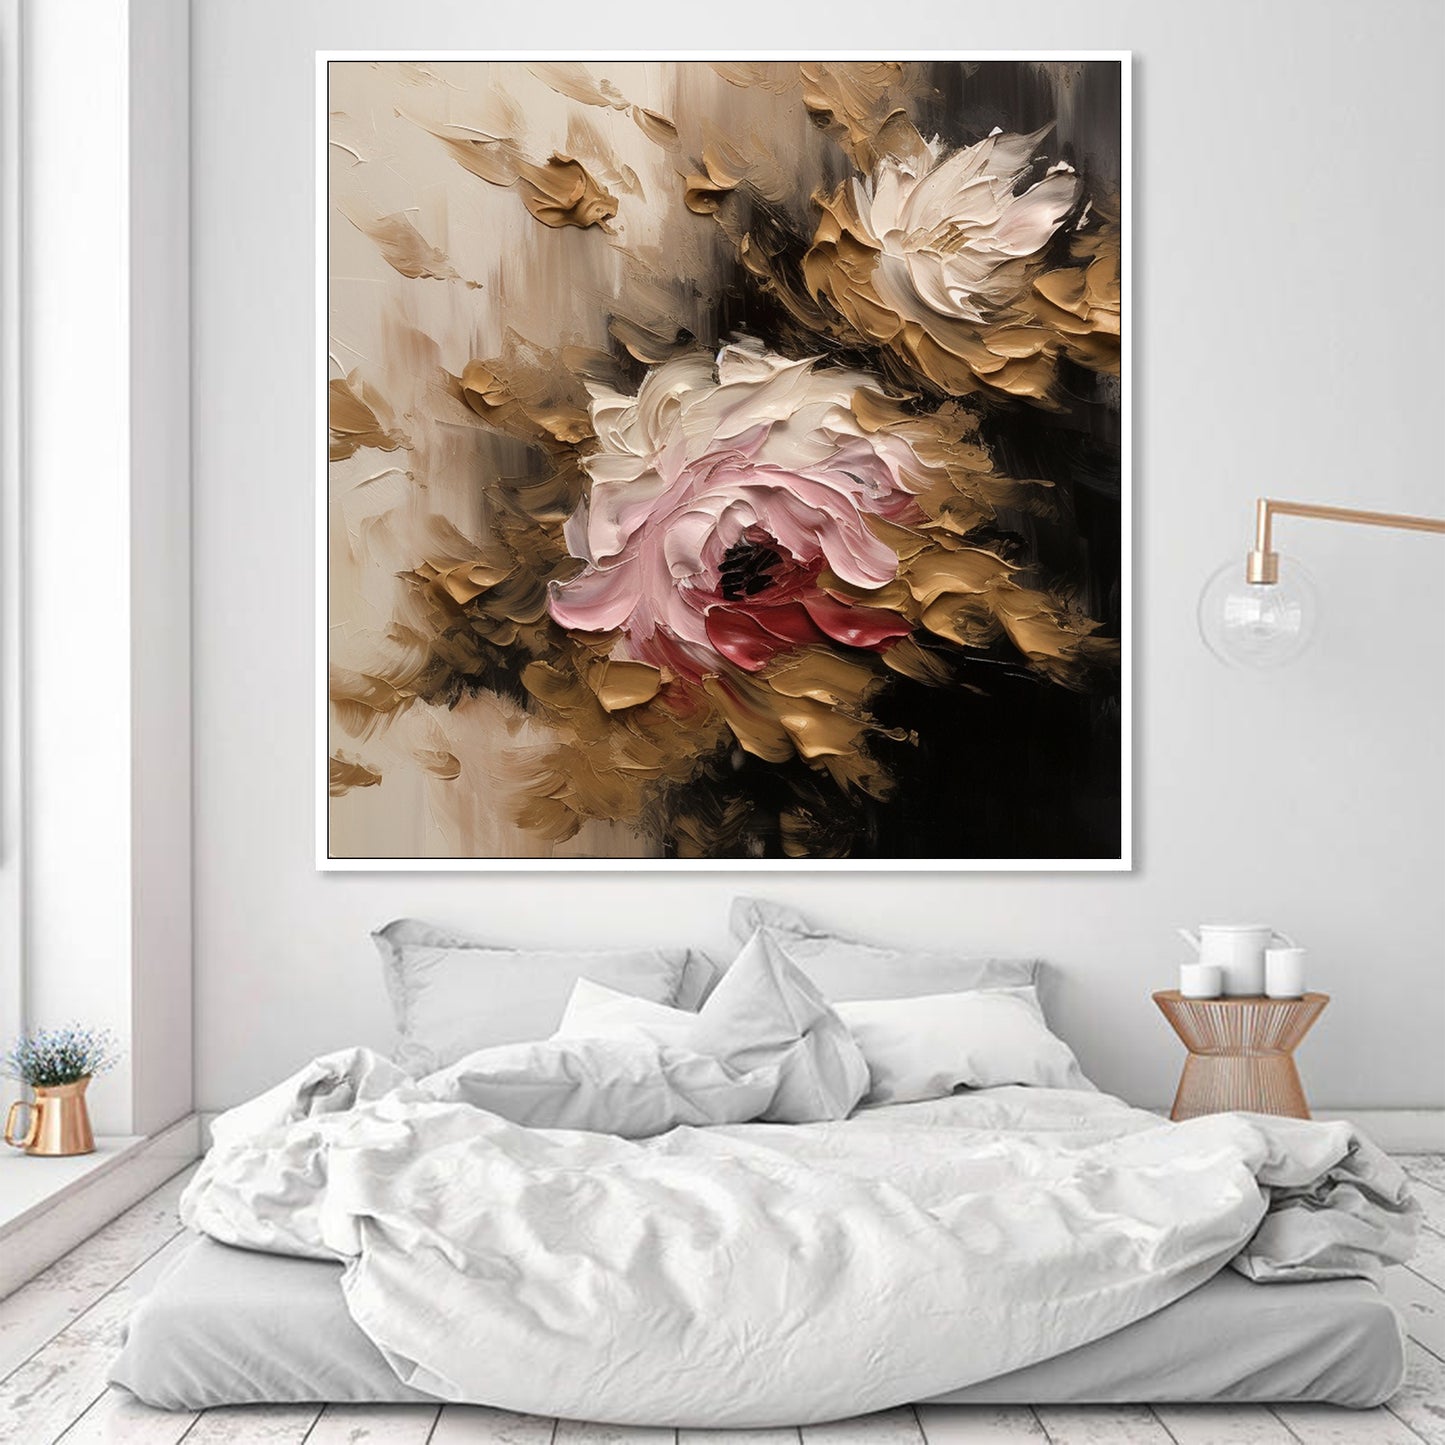 Texture Wall Decor Home Decor Gift Abstract Floral Painting F#BRT2382